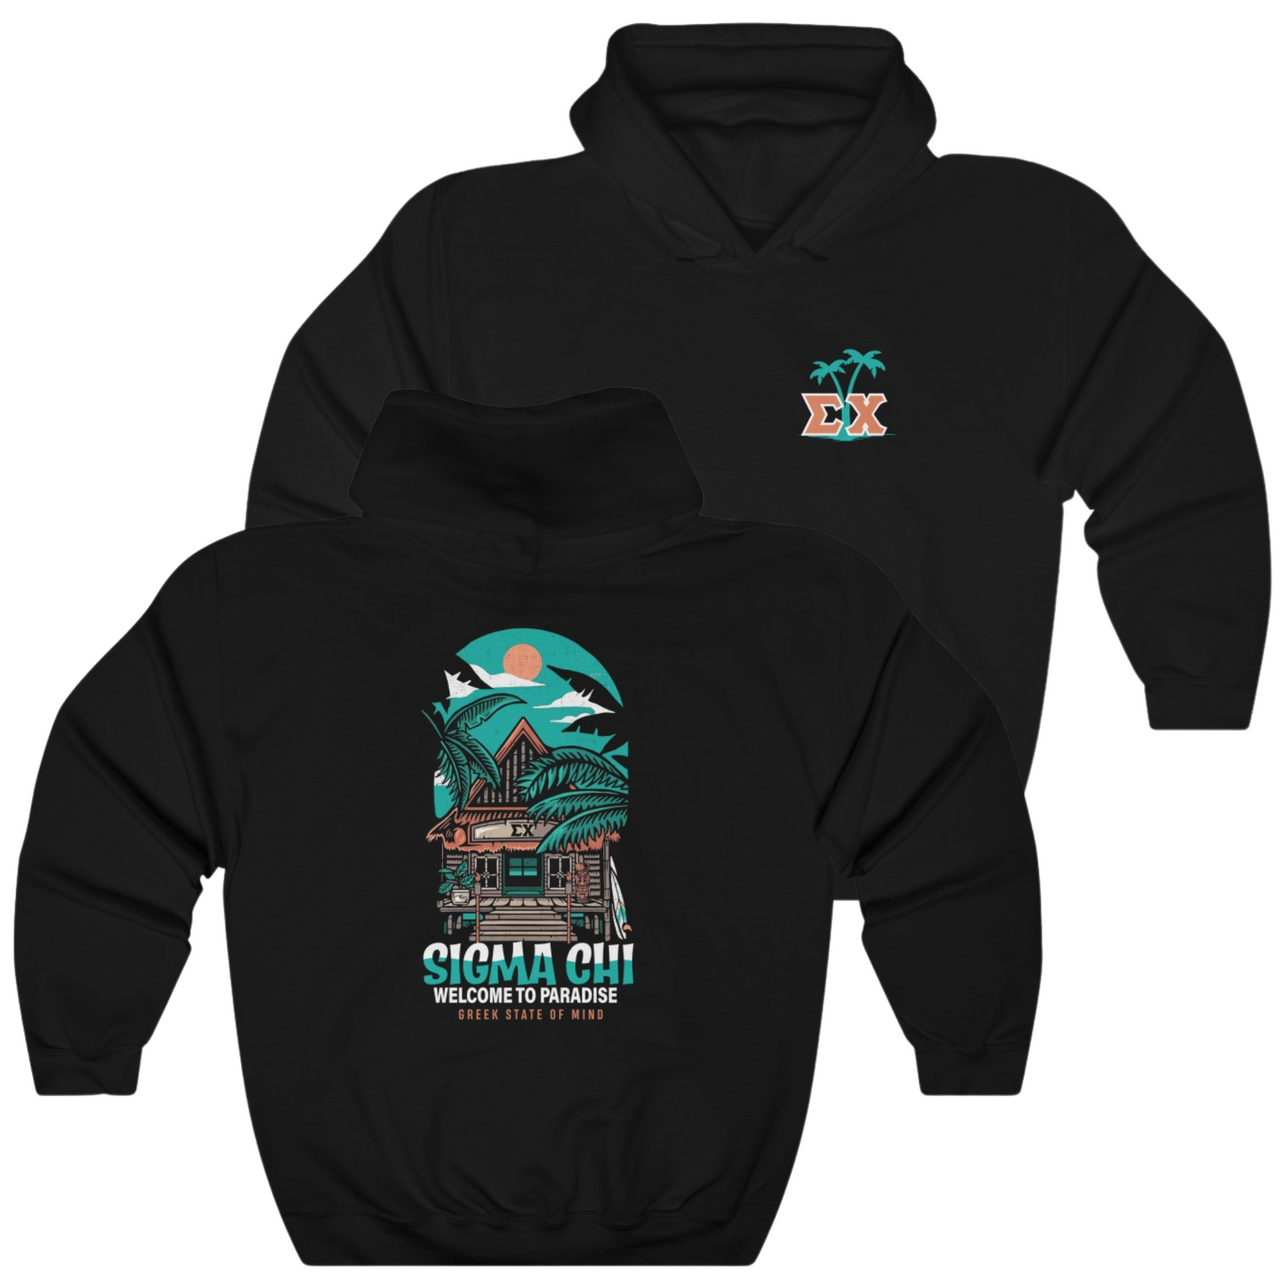 Black Sigma Chi Graphic Hoodie | Welcome to Paradise | Sigma Chi Fraternity Merch House